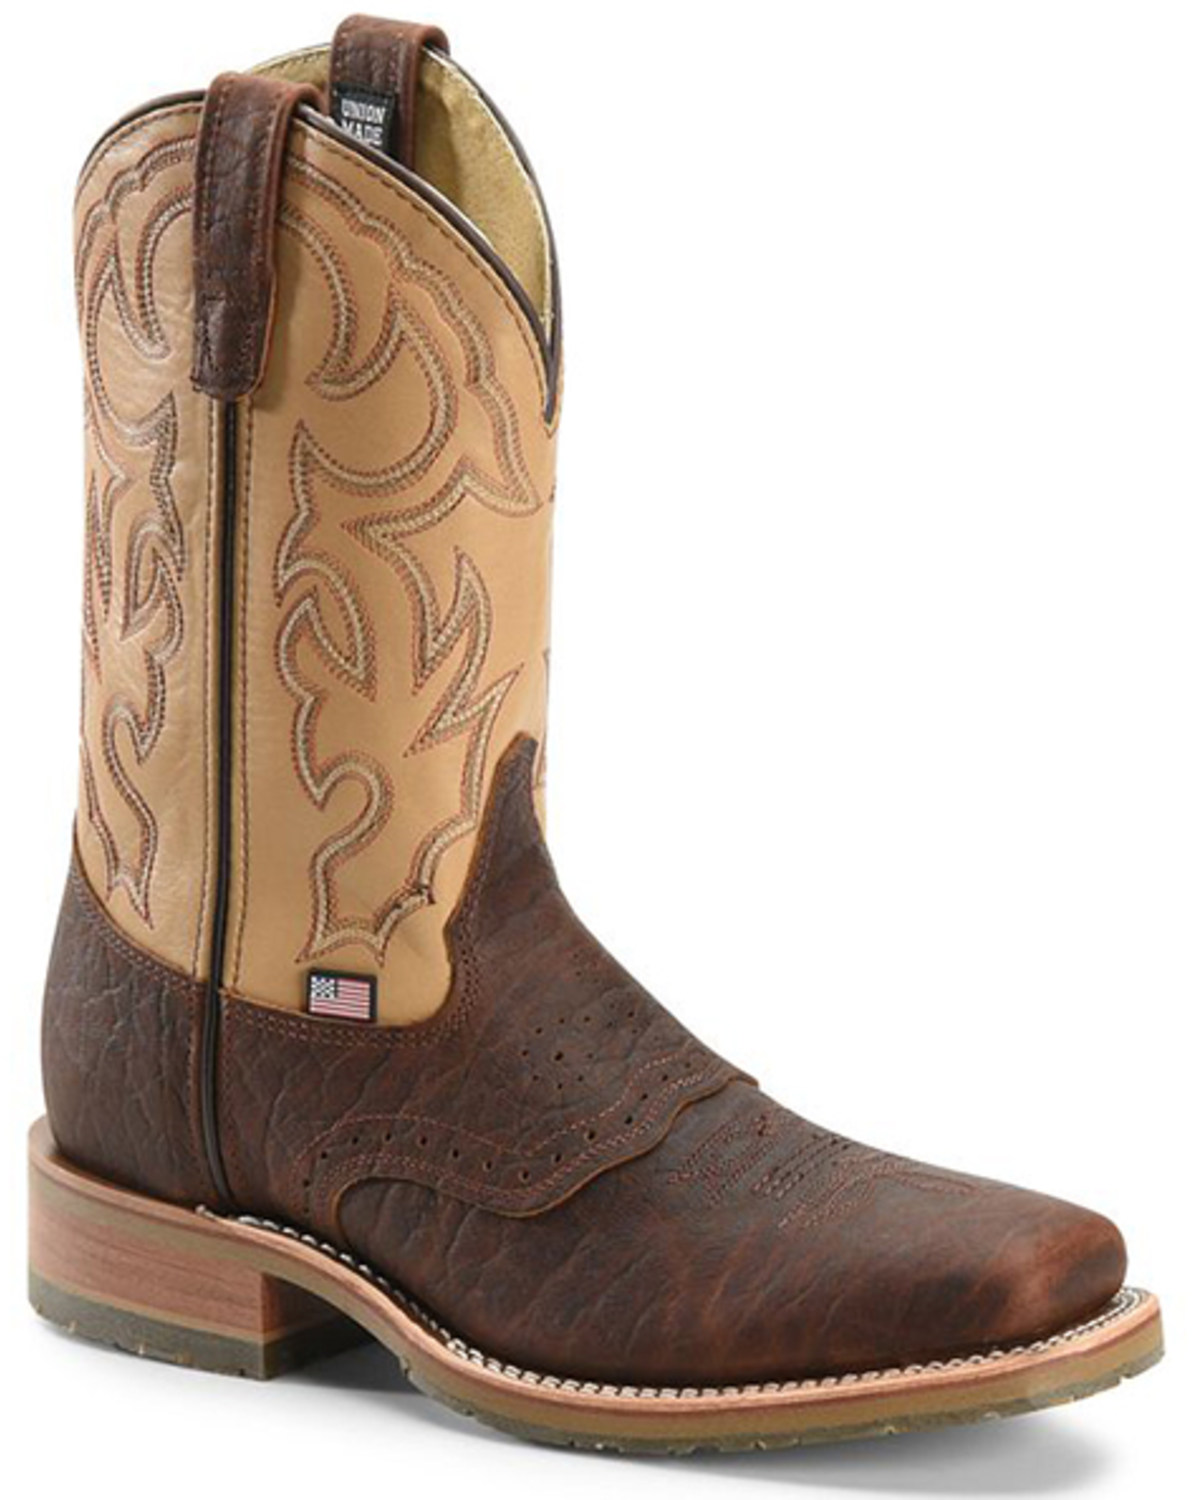 Double-H Men's Square Steel Toe Western Boots